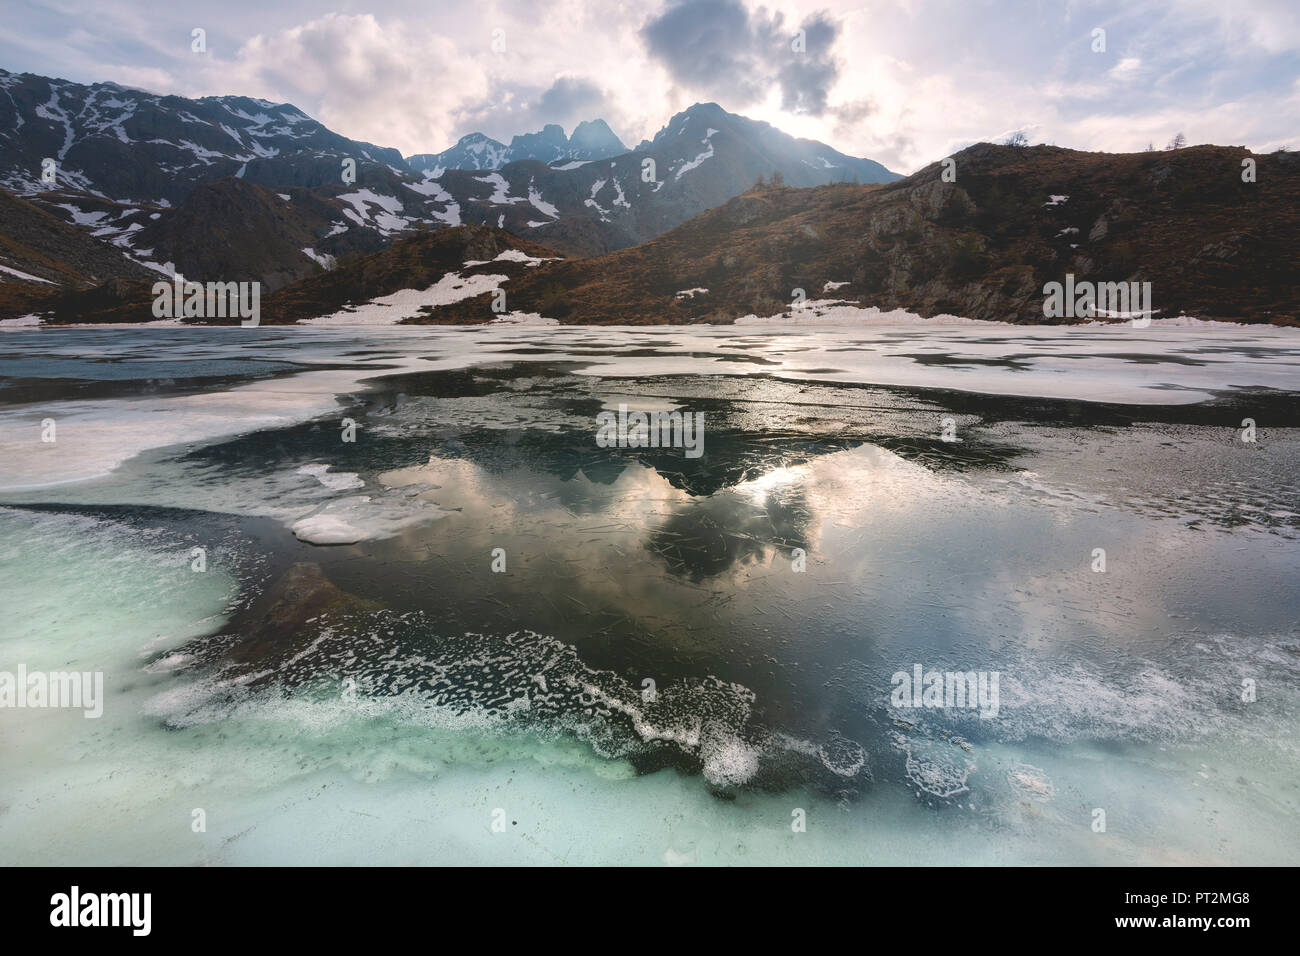 Seroti lake at thaw in Stelvio national park, Lombardy district, Brescia province Italy, Stock Photo